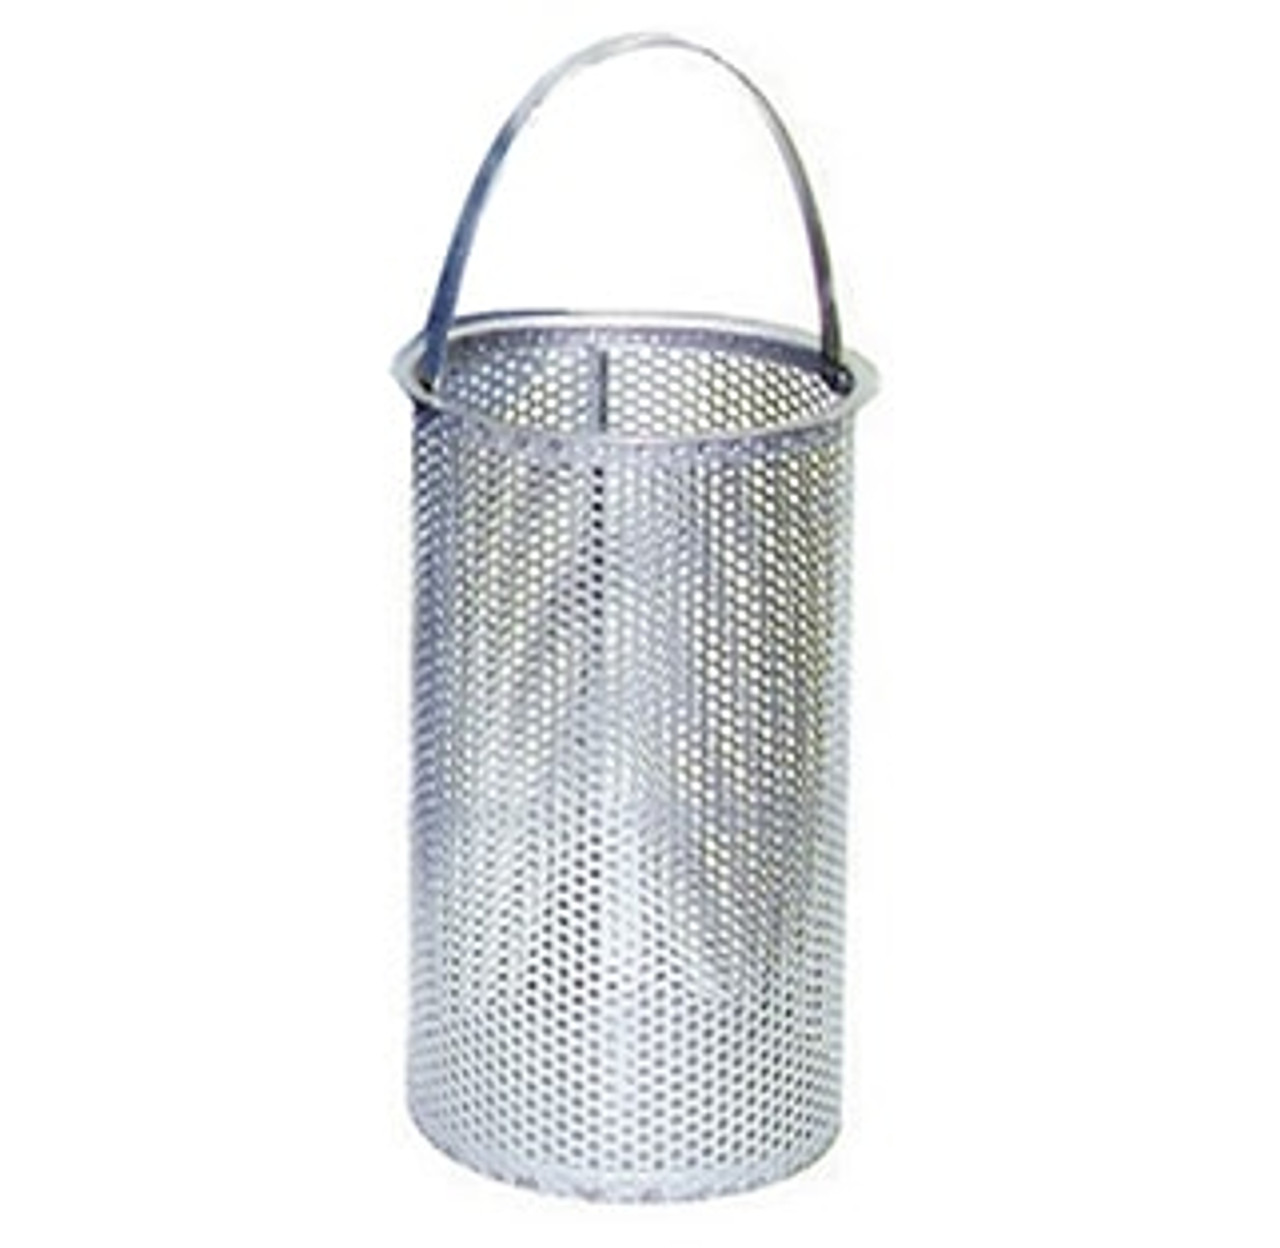 20 Mesh and 5/32" Perforation Replacement Basket for 4" Eaton Model 30R Strainer